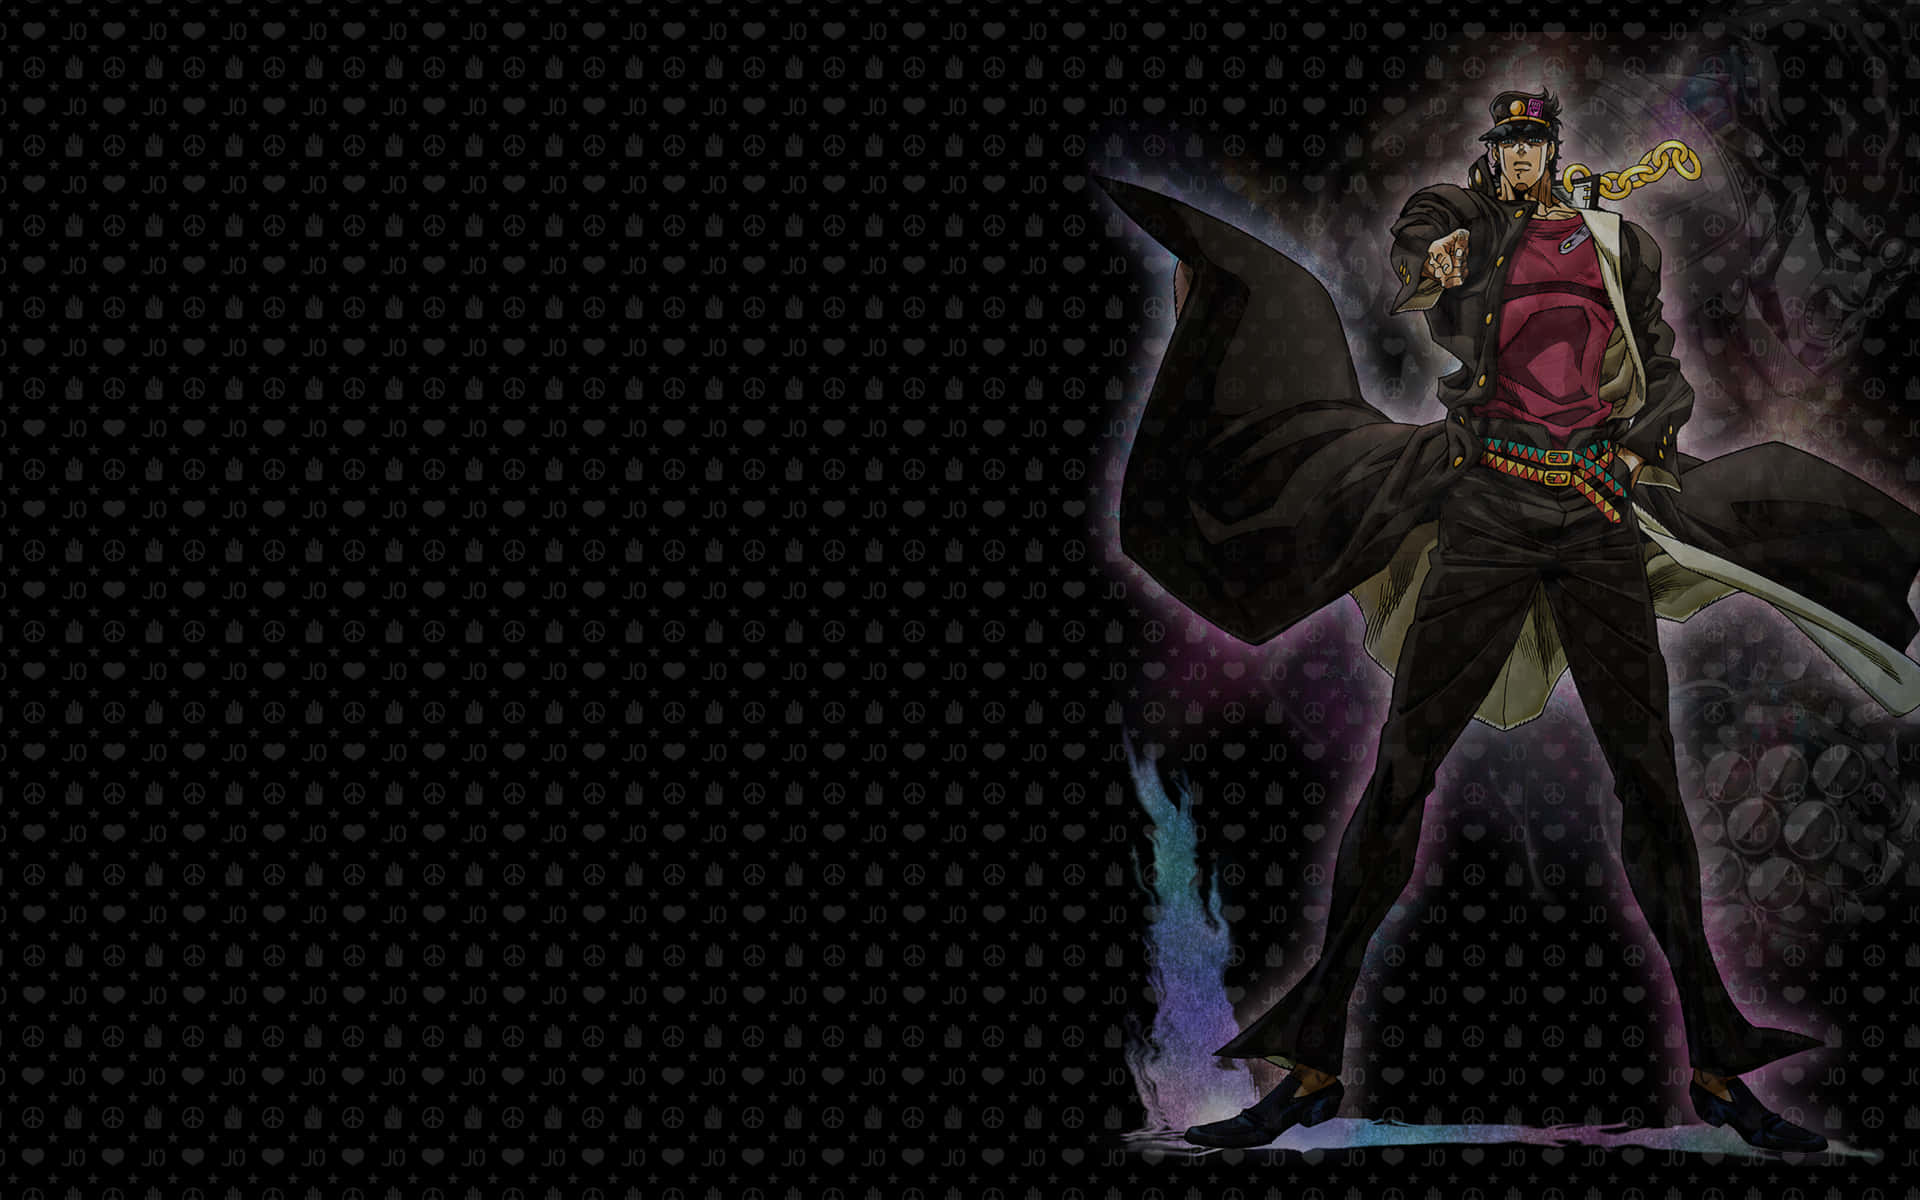 Jotaro Kujo and companions embarking on a thrilling adventure in Stardust Crusaders Wallpaper